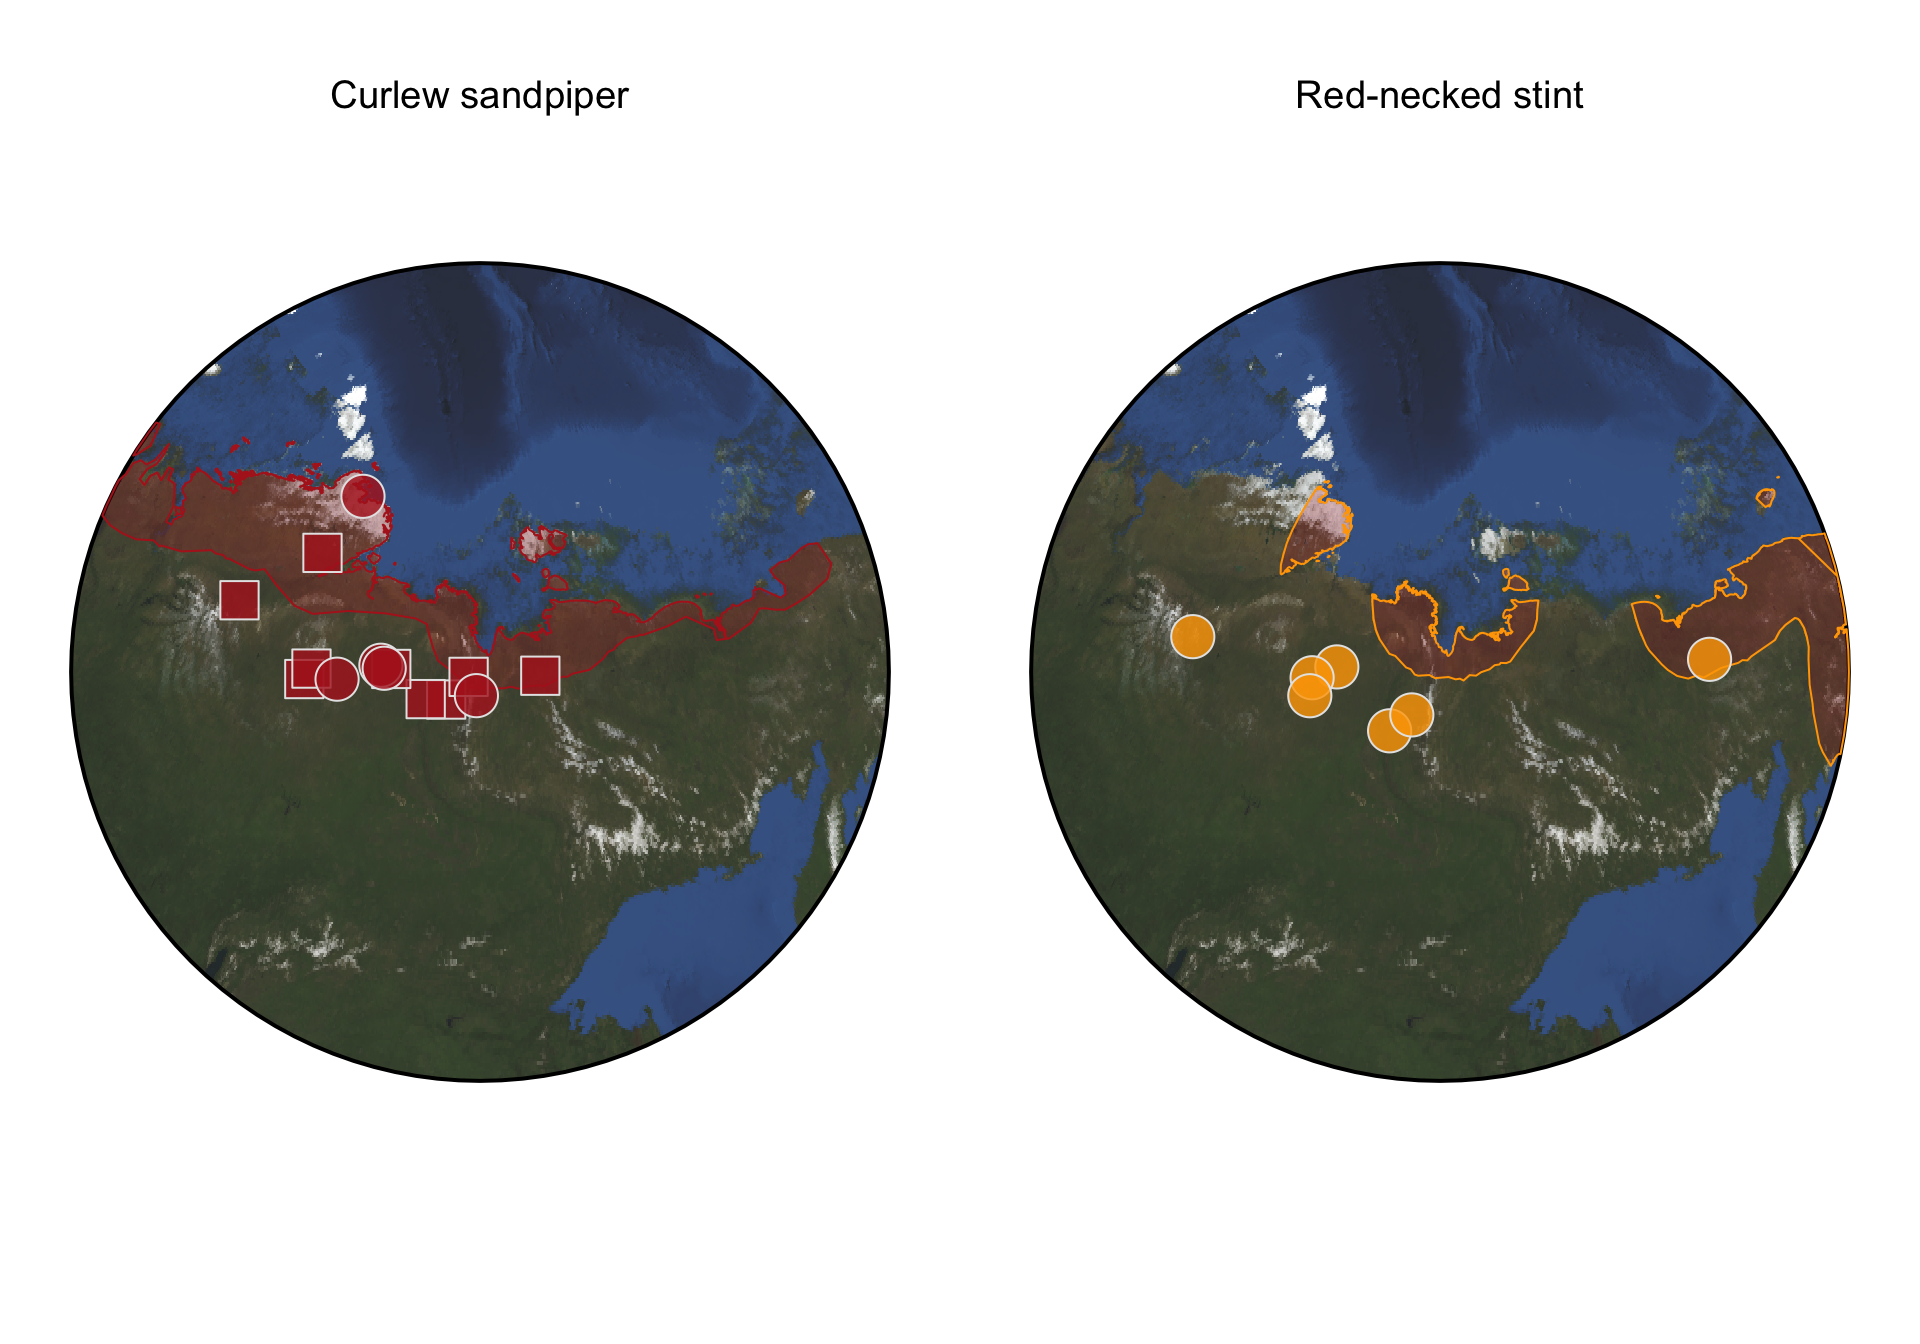 Figure 1: Estimated breeding sites of tracked Curlew sandpipers (left) and Red-necked stints (right). The colored areas indicate the breeding range derived from BirdLife. The rectangles are breeding sites during the Arctic summer in 2018 and circles are estaimted sites during 2019.